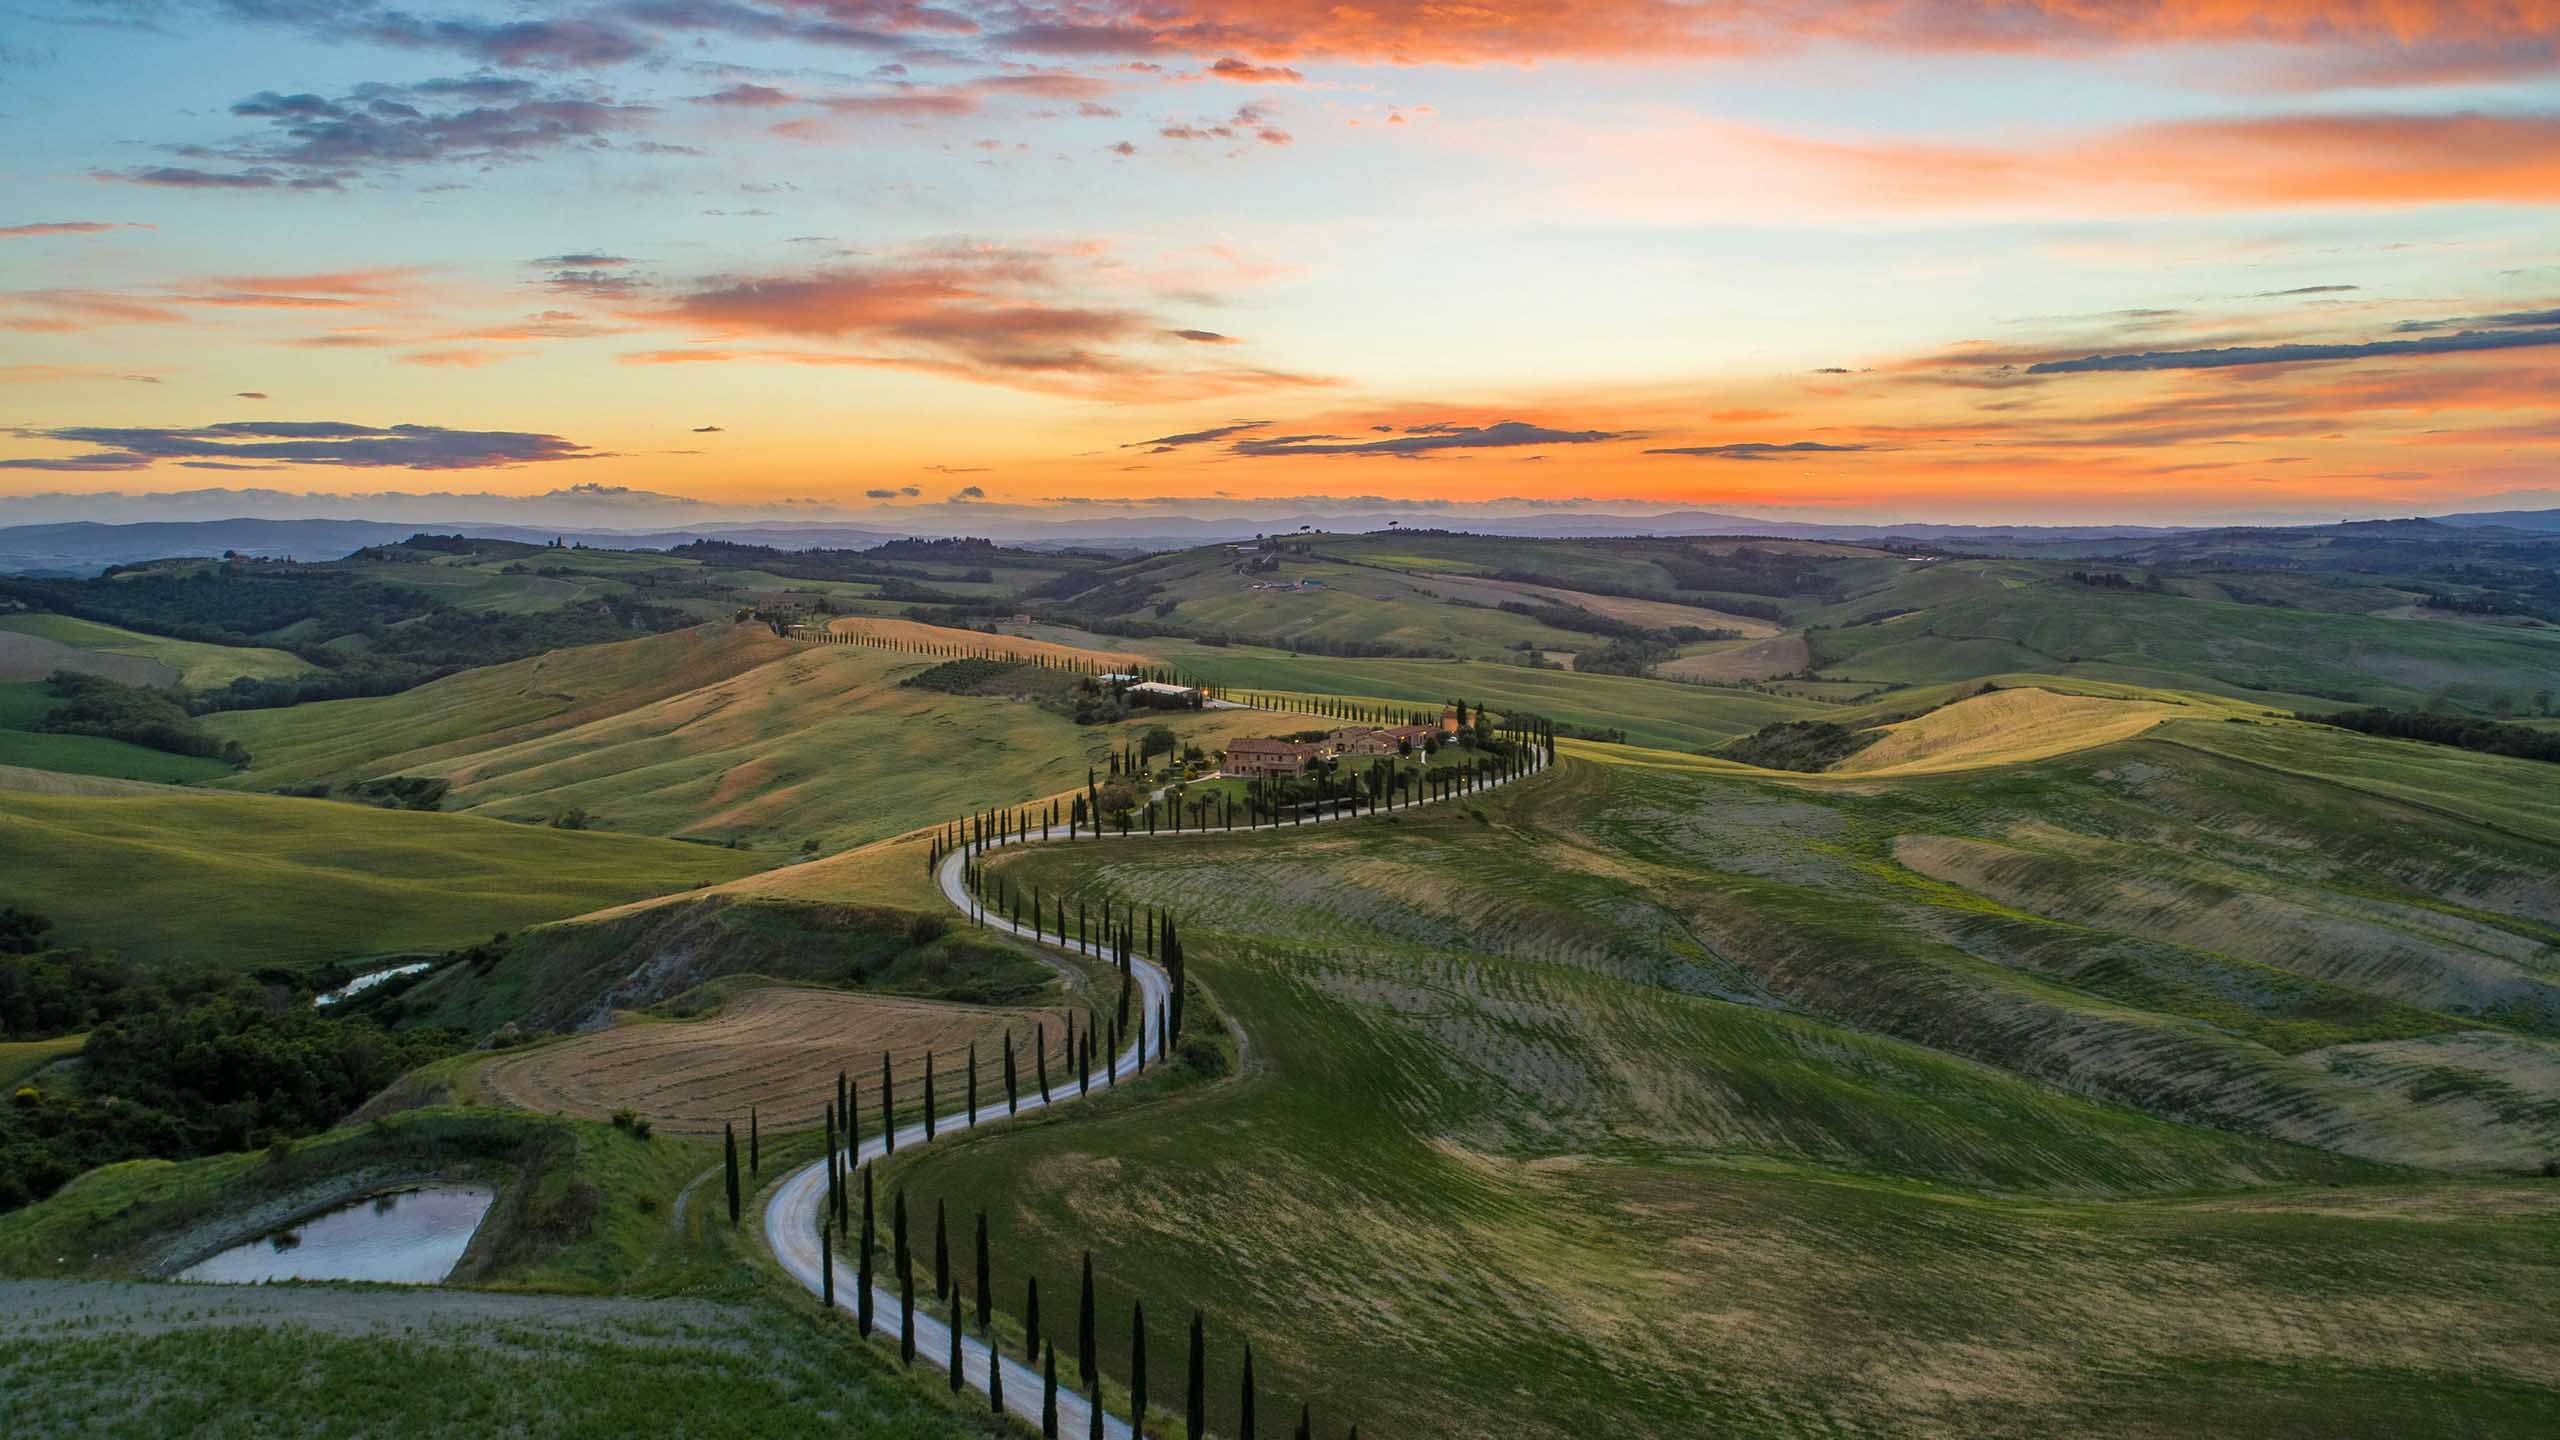 Tuscany by Luca Micheli